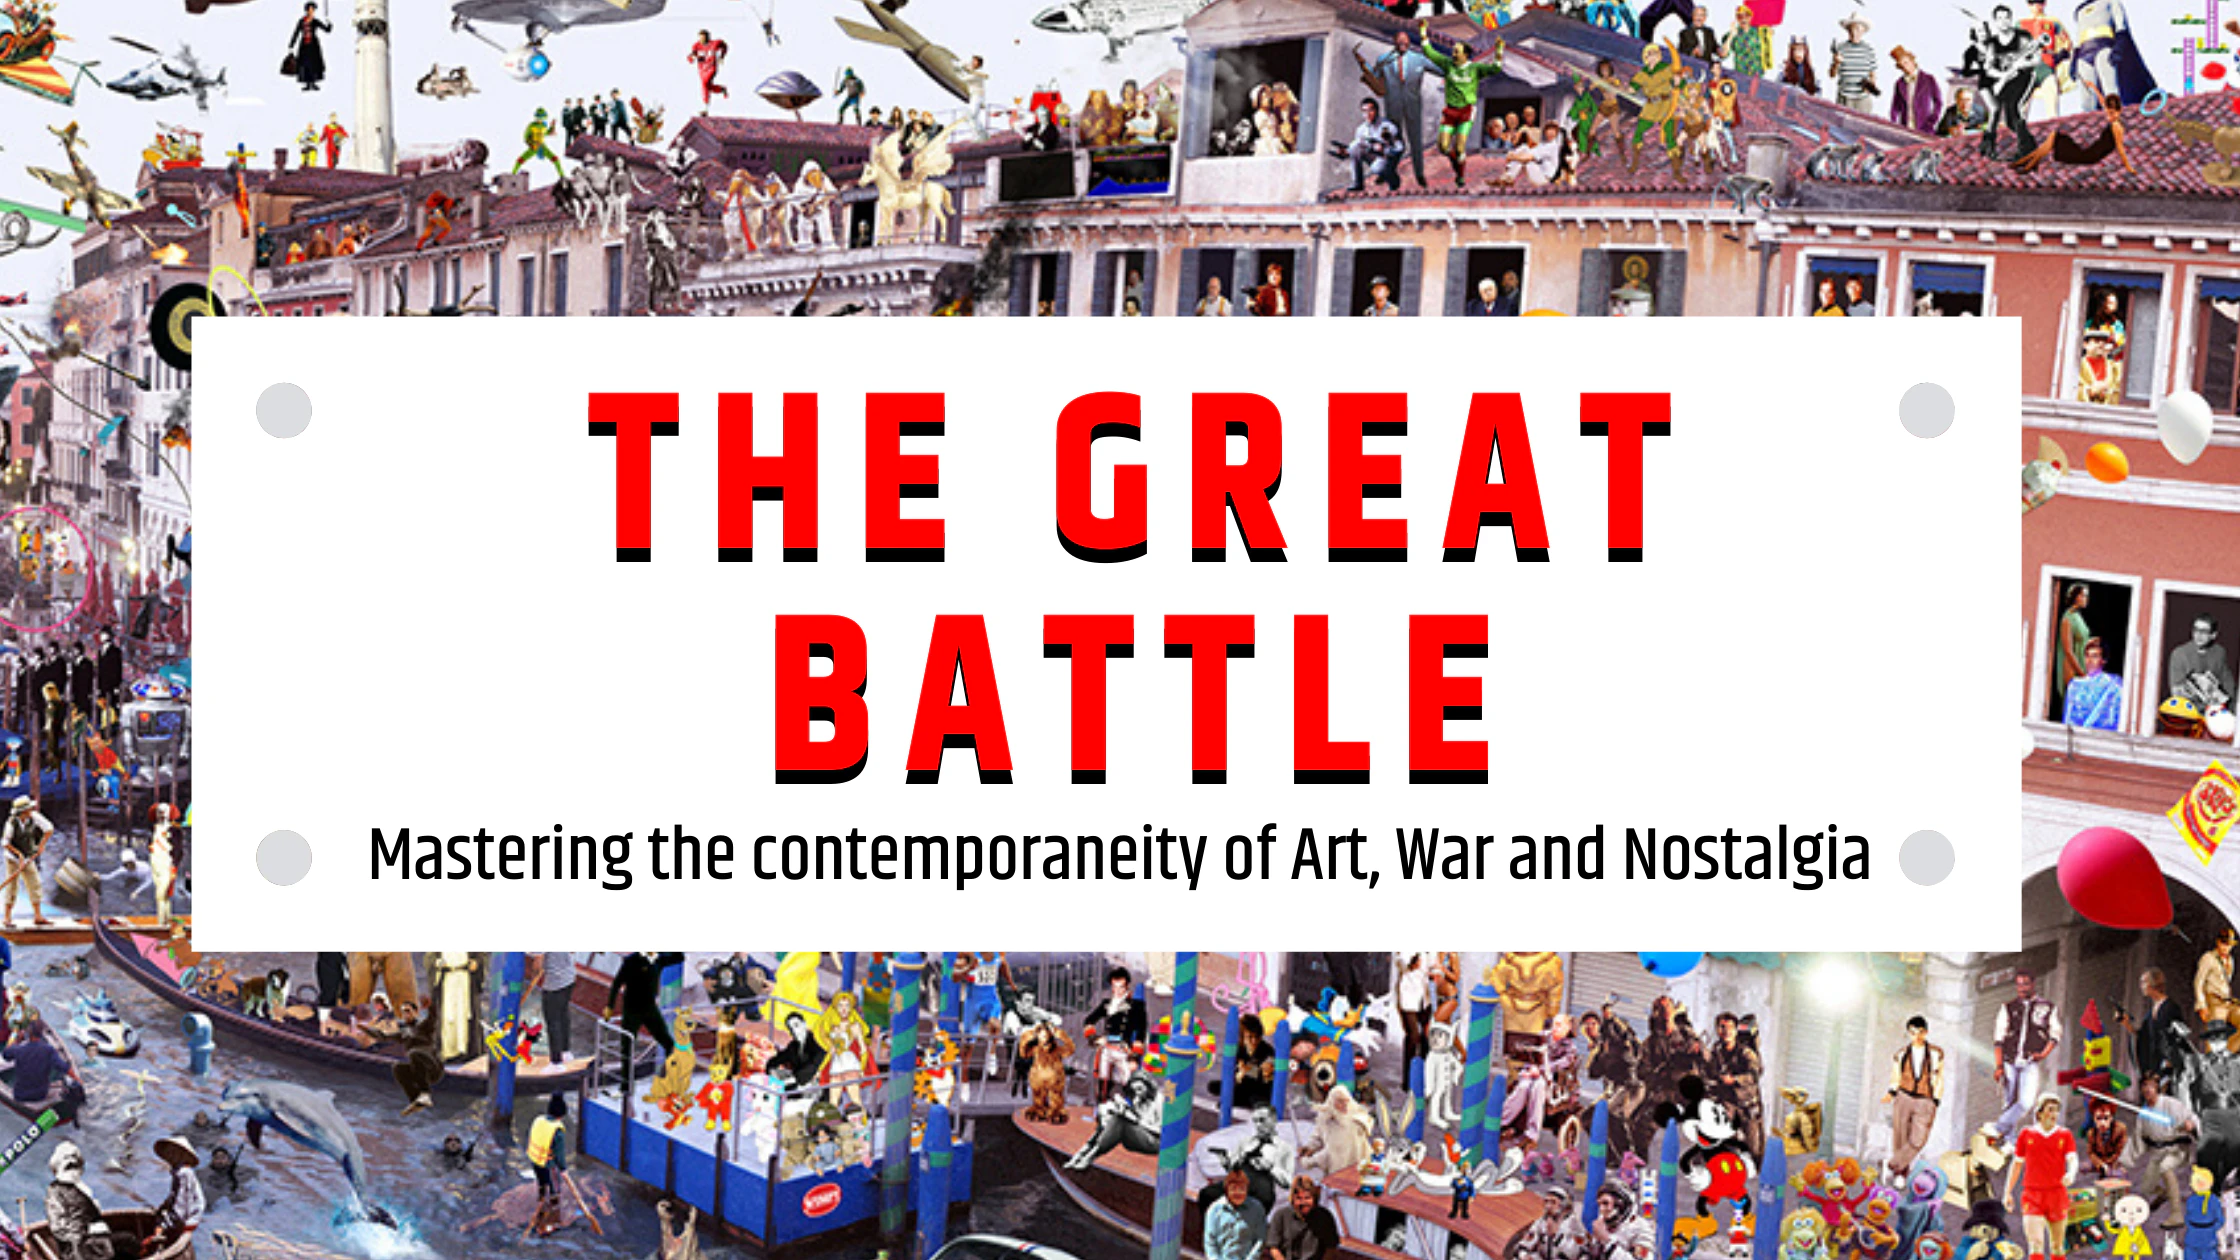 The Great Battle: Mastering the contemporaneity of Art, War and Nostalgia